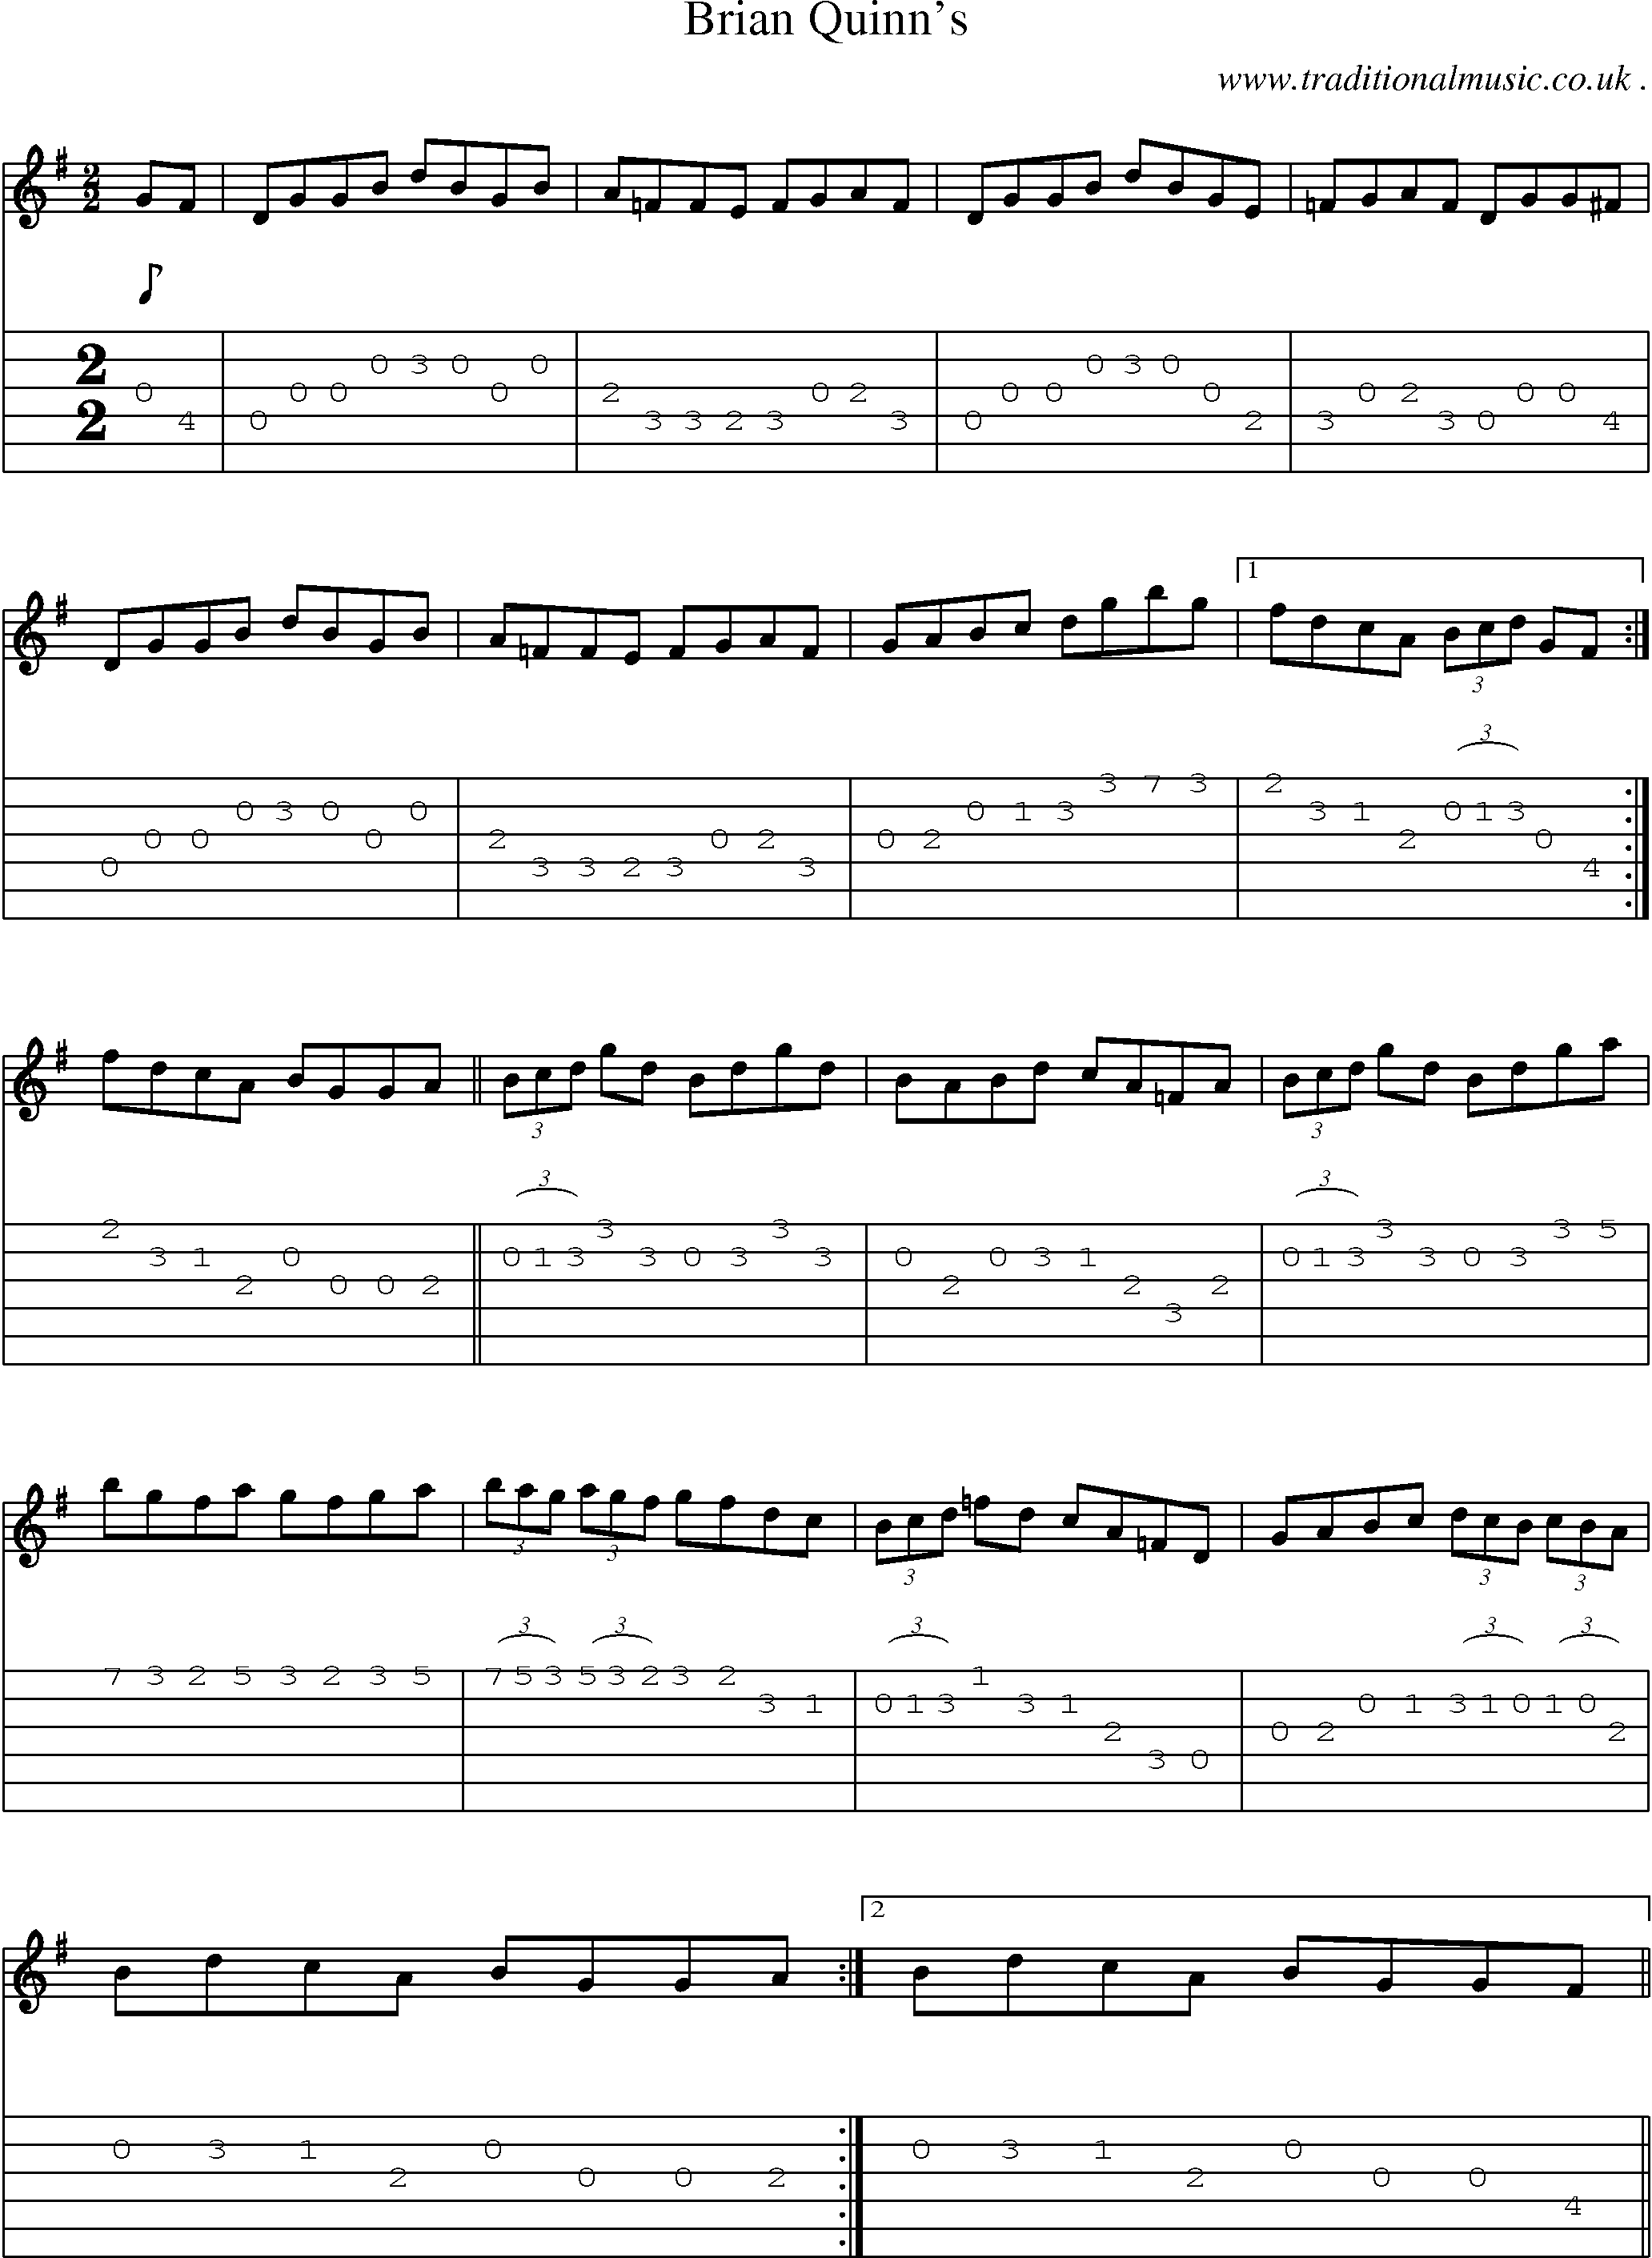 Sheet-Music and Guitar Tabs for Brian Quinns